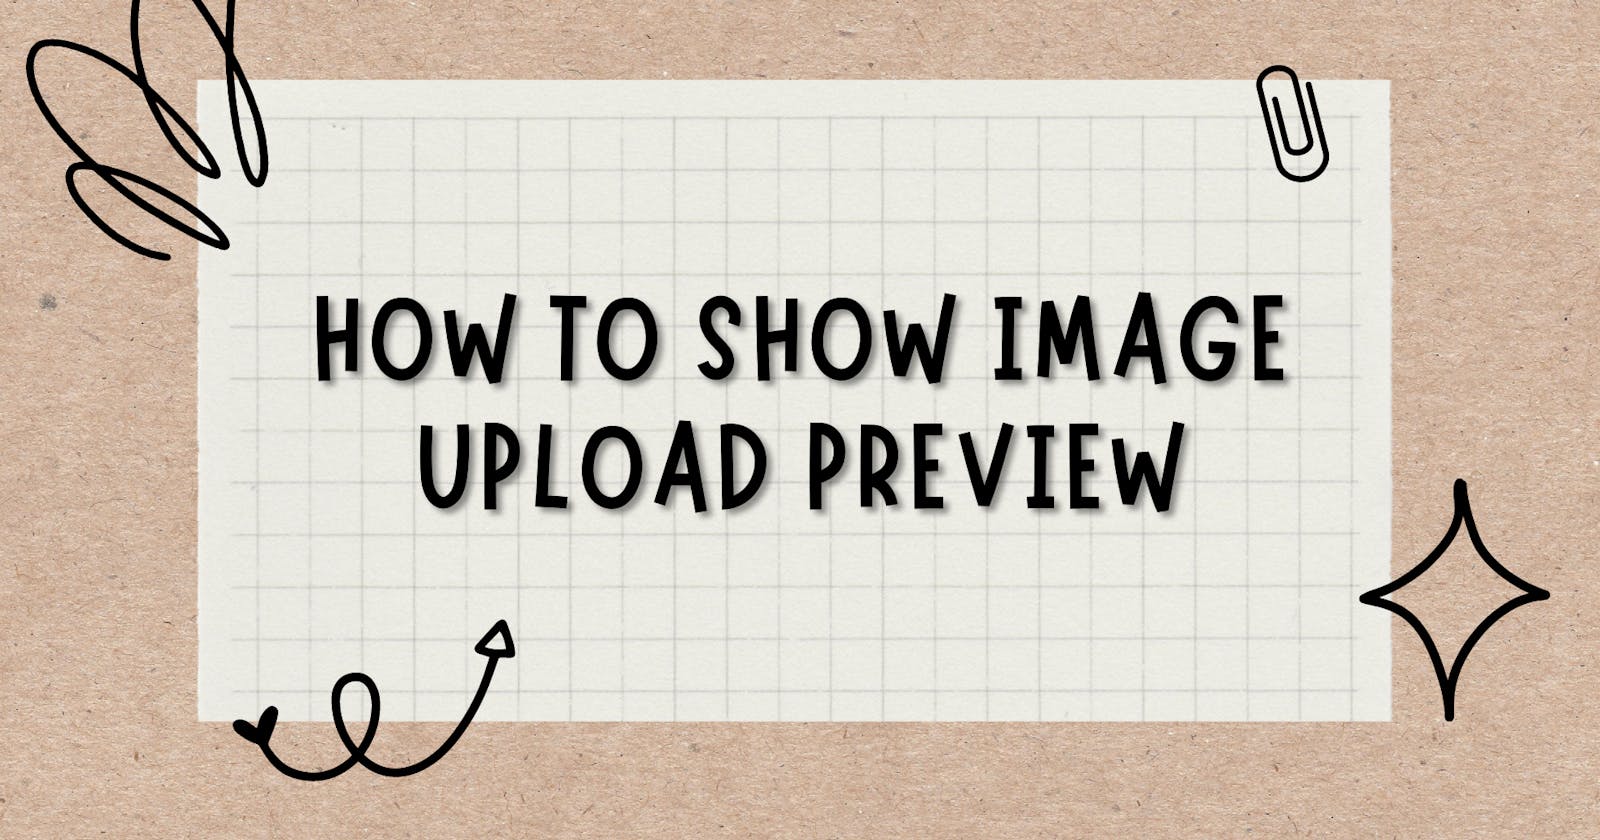 How to show Image upload preview